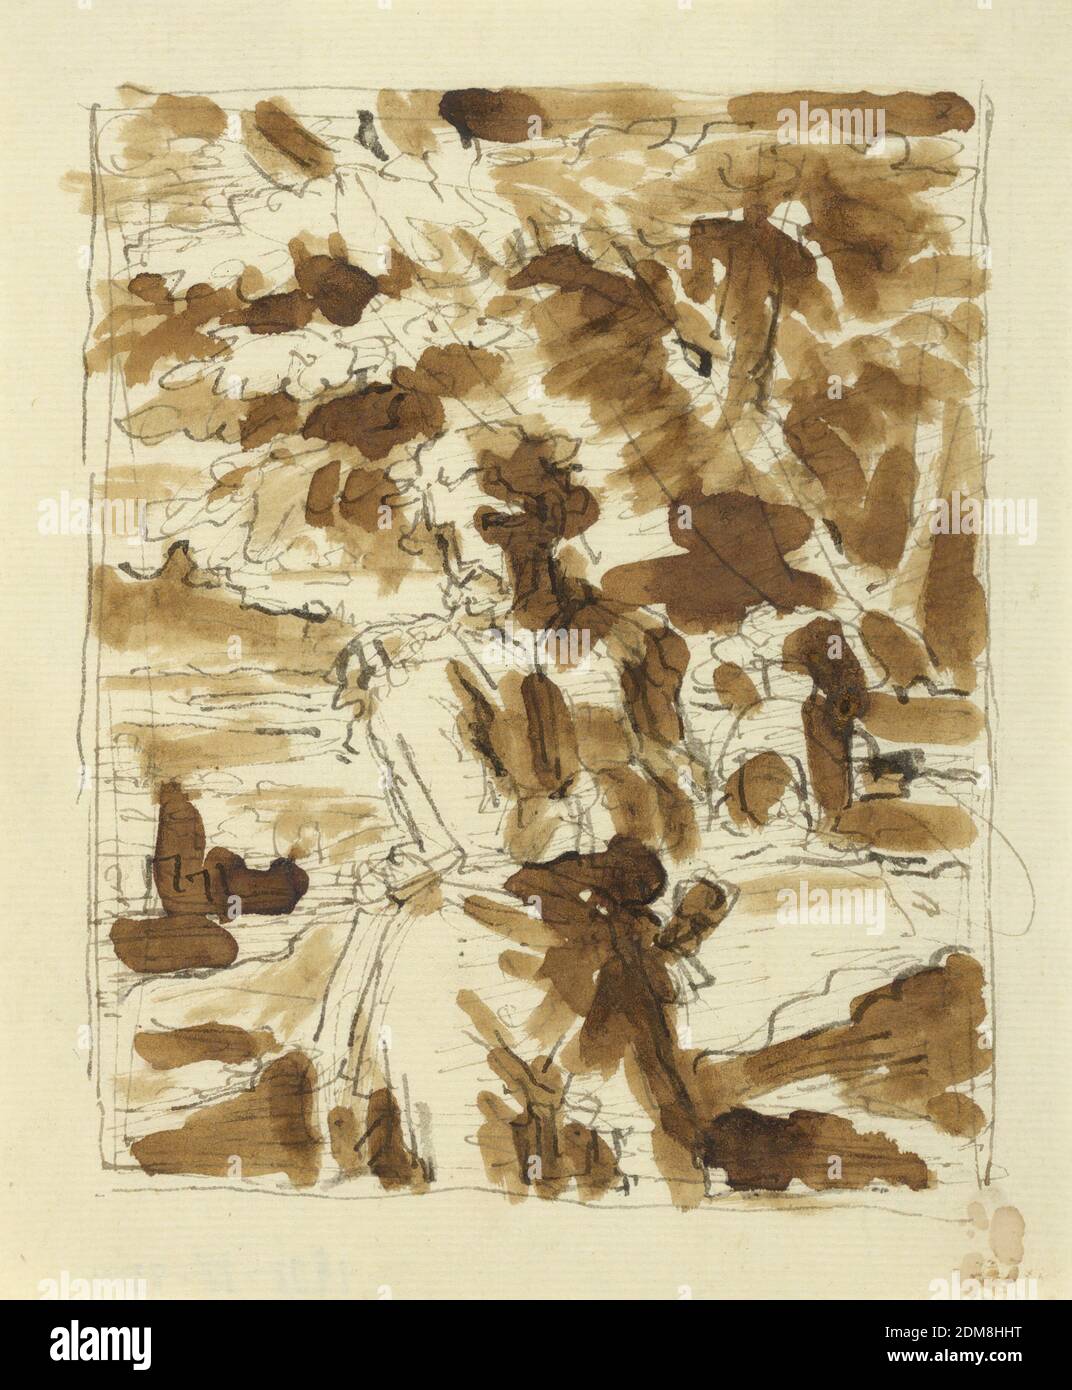 Sketch, Classical Male Figure in Landscape, Fortunato Duranti, Italian, 1787 - 1863, Pen and ink, brush and sepia wash on paper, Sketch, Classical Male Figure in Landscape., Rome, Italy, 1820–1850, Drawing Stock Photo